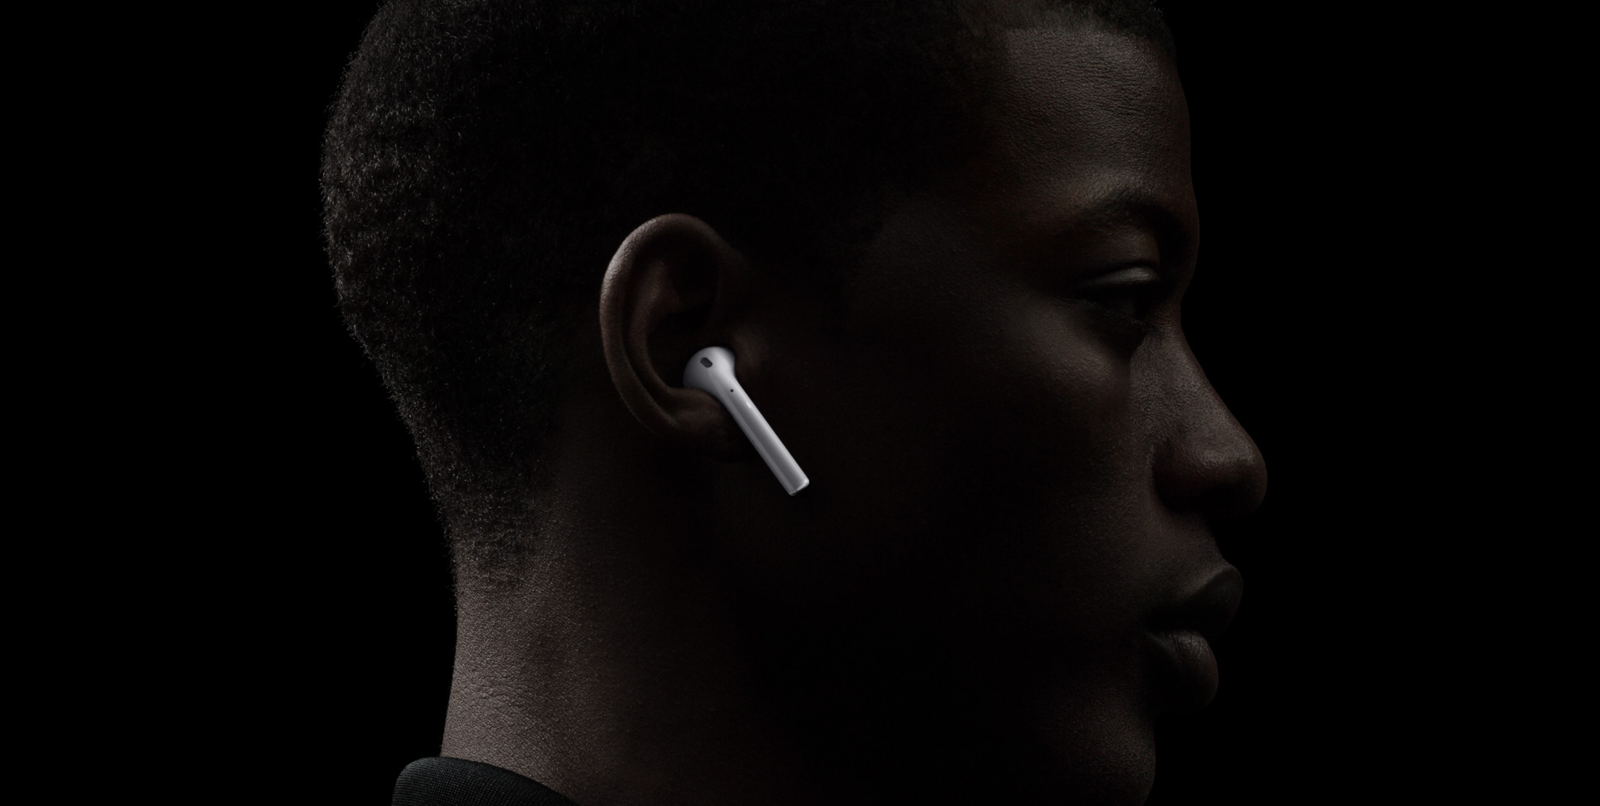 People Wearing AirPods Are Making Things Awkward For Everyone Else